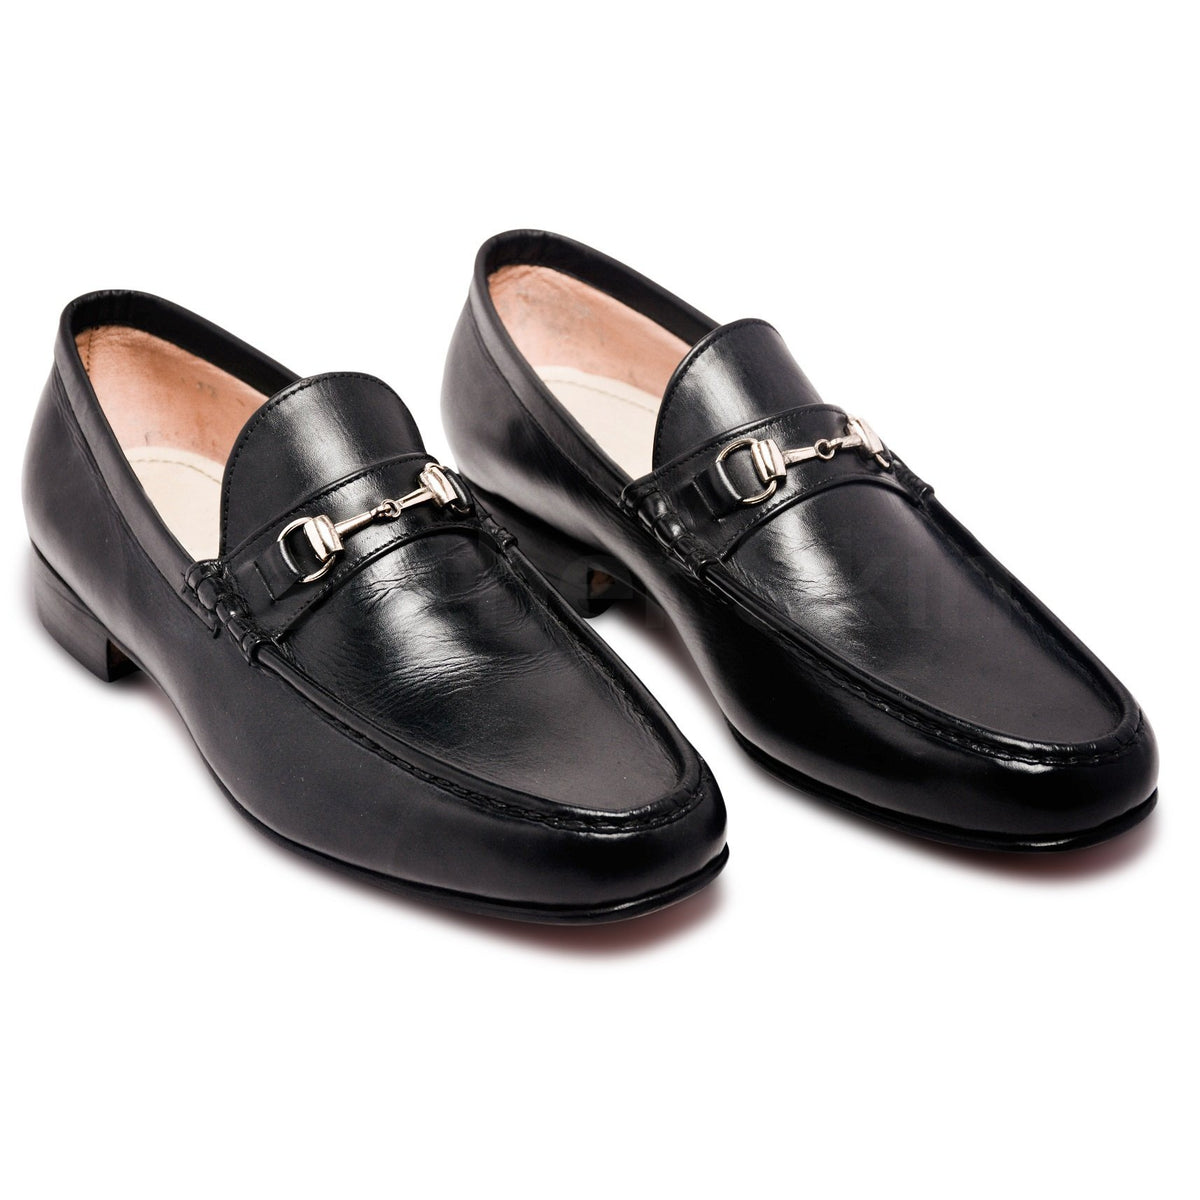 Mens Black Bit Loafers Shoes with Gold Metal Decoration - Leather